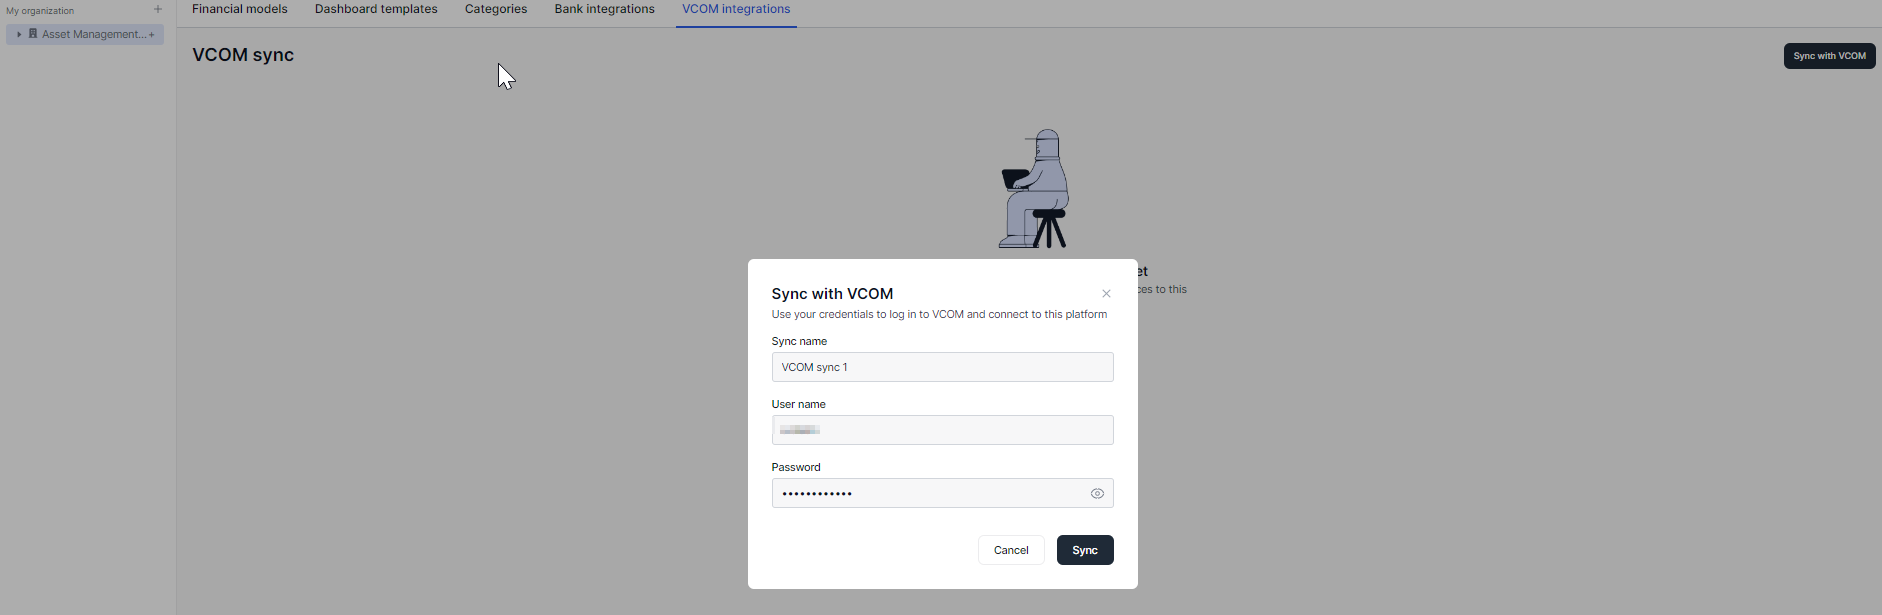 Sync with VCOM